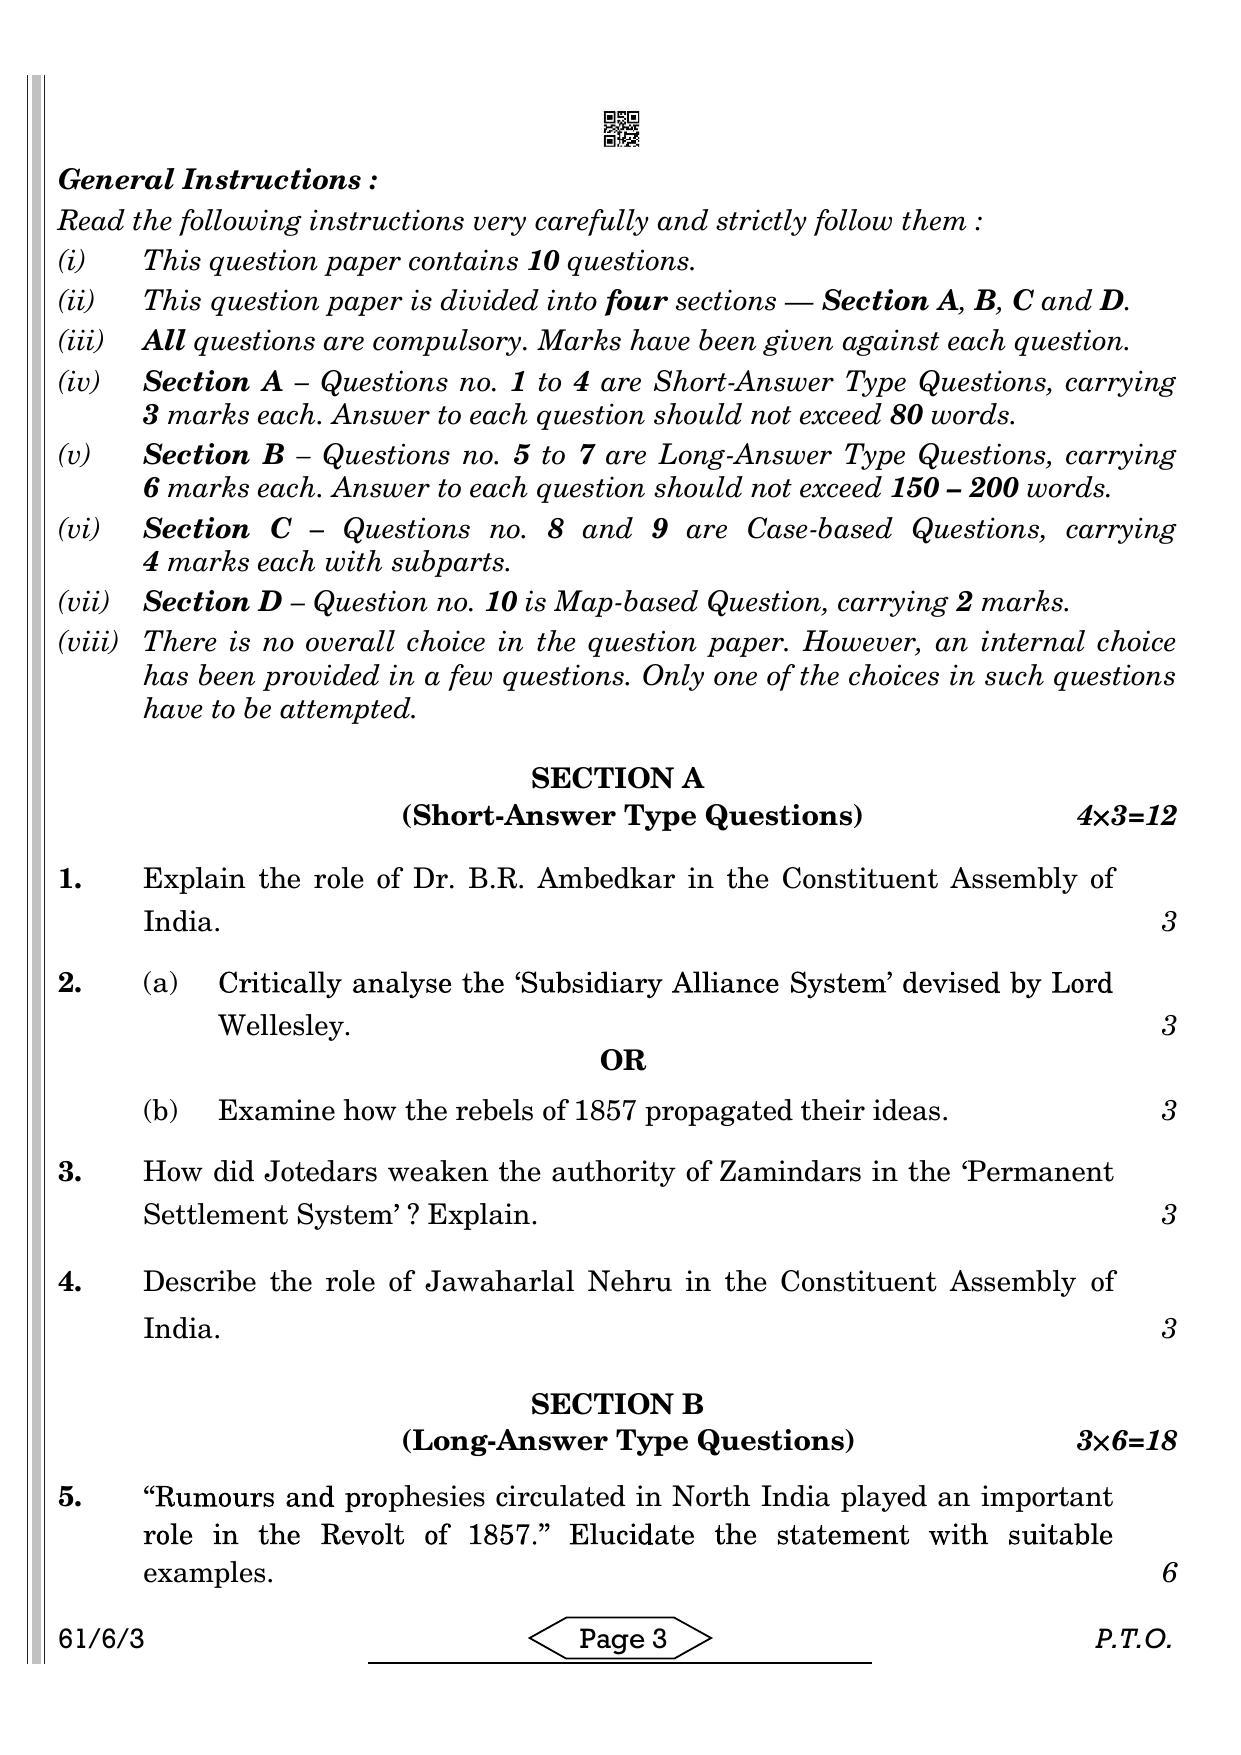 CBSE Class 12 61-6-3 HISTORY 2022 Compartment Question Paper - Page 3